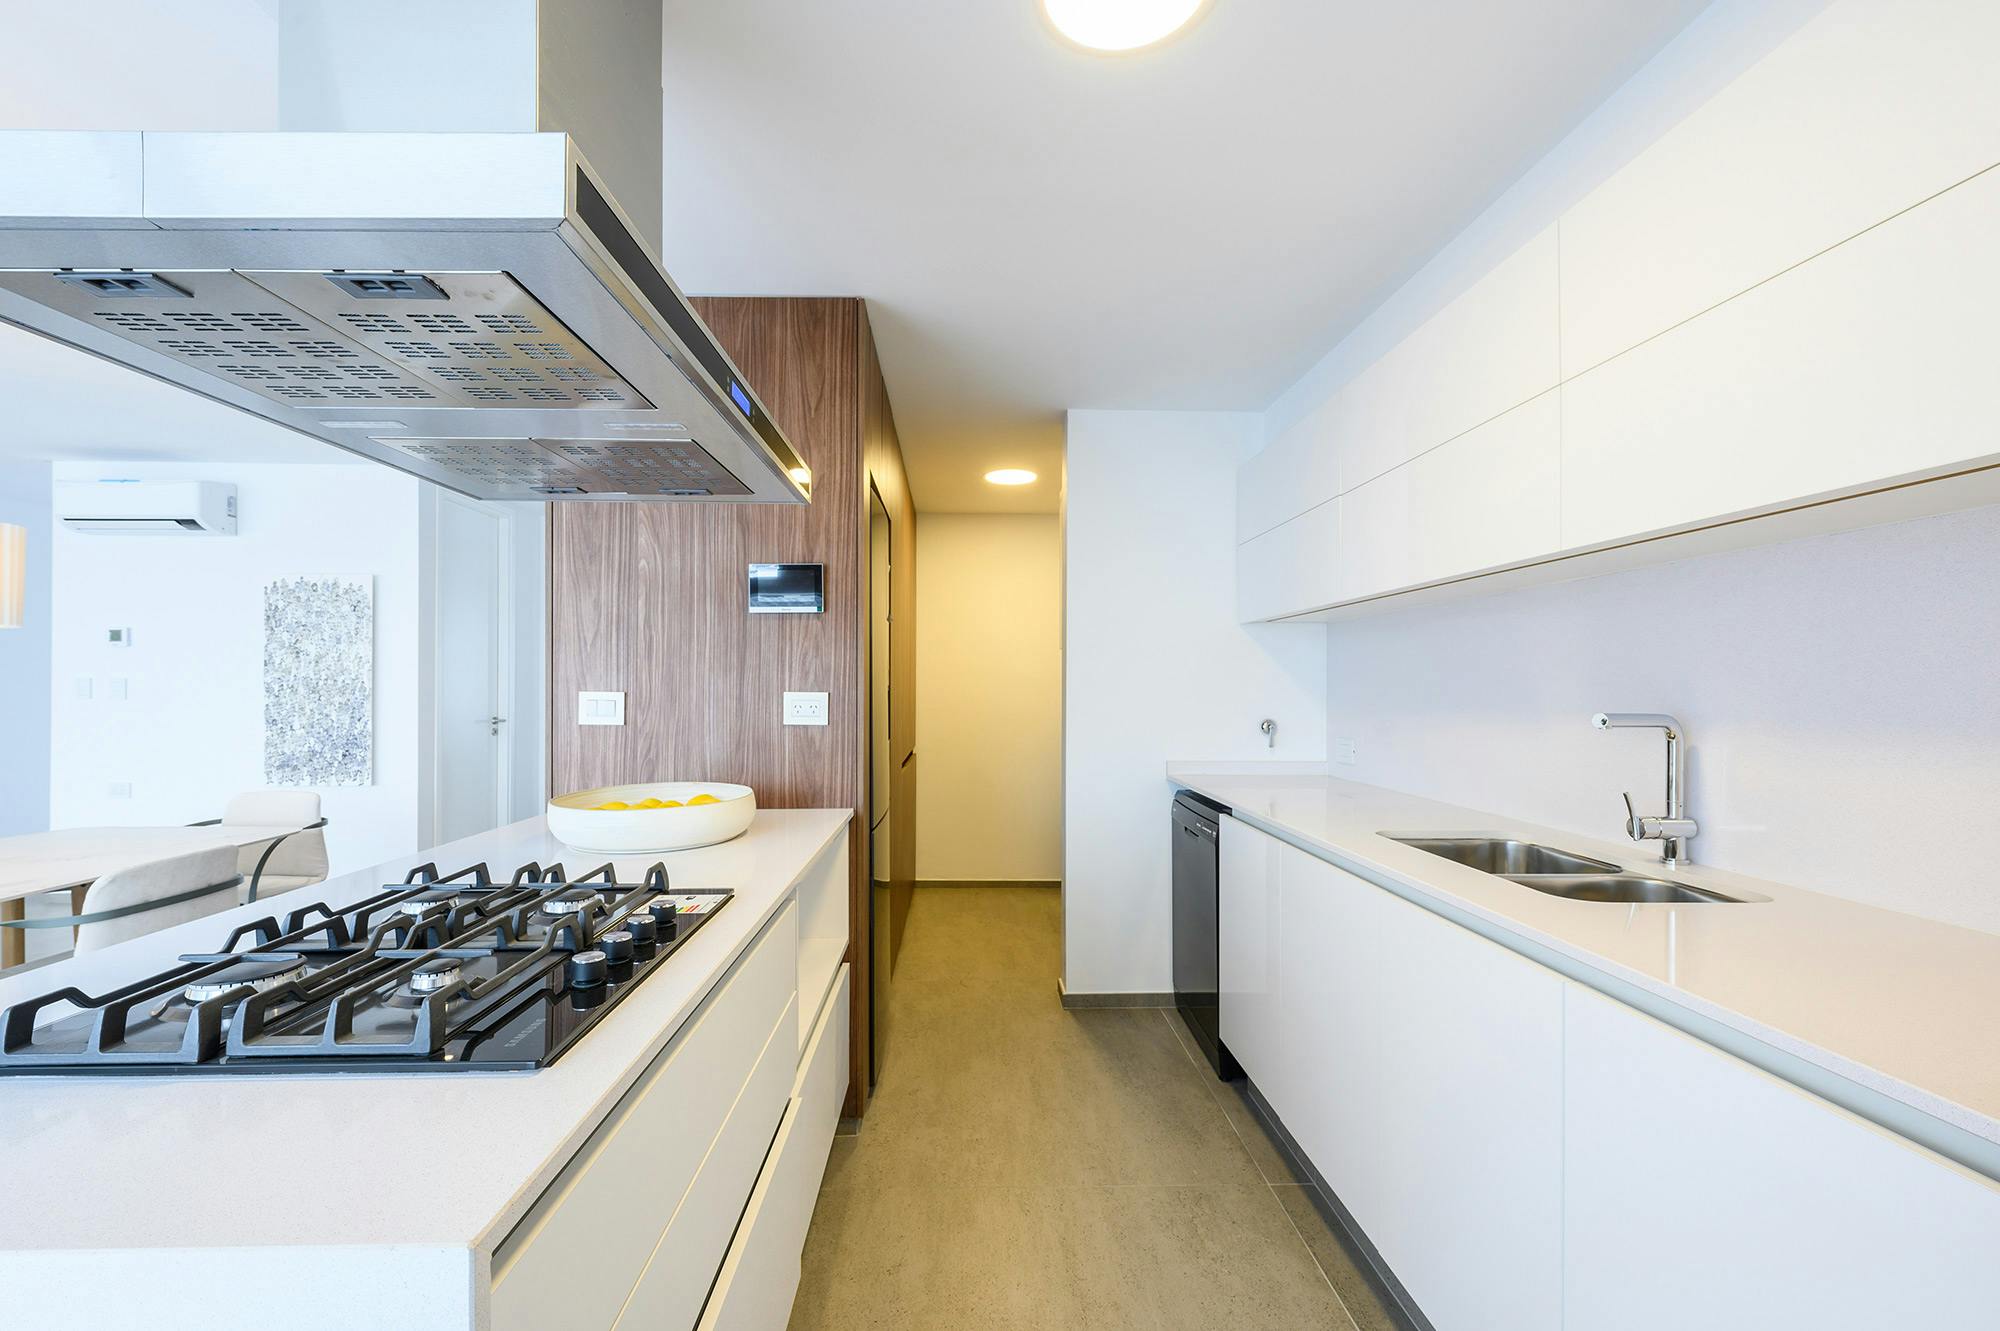 Numéro d'image 35 de la section actuelle de DKTN Sirius adds a welcoming touch to the kitchens of a residential development in Dubai de Cosentino France